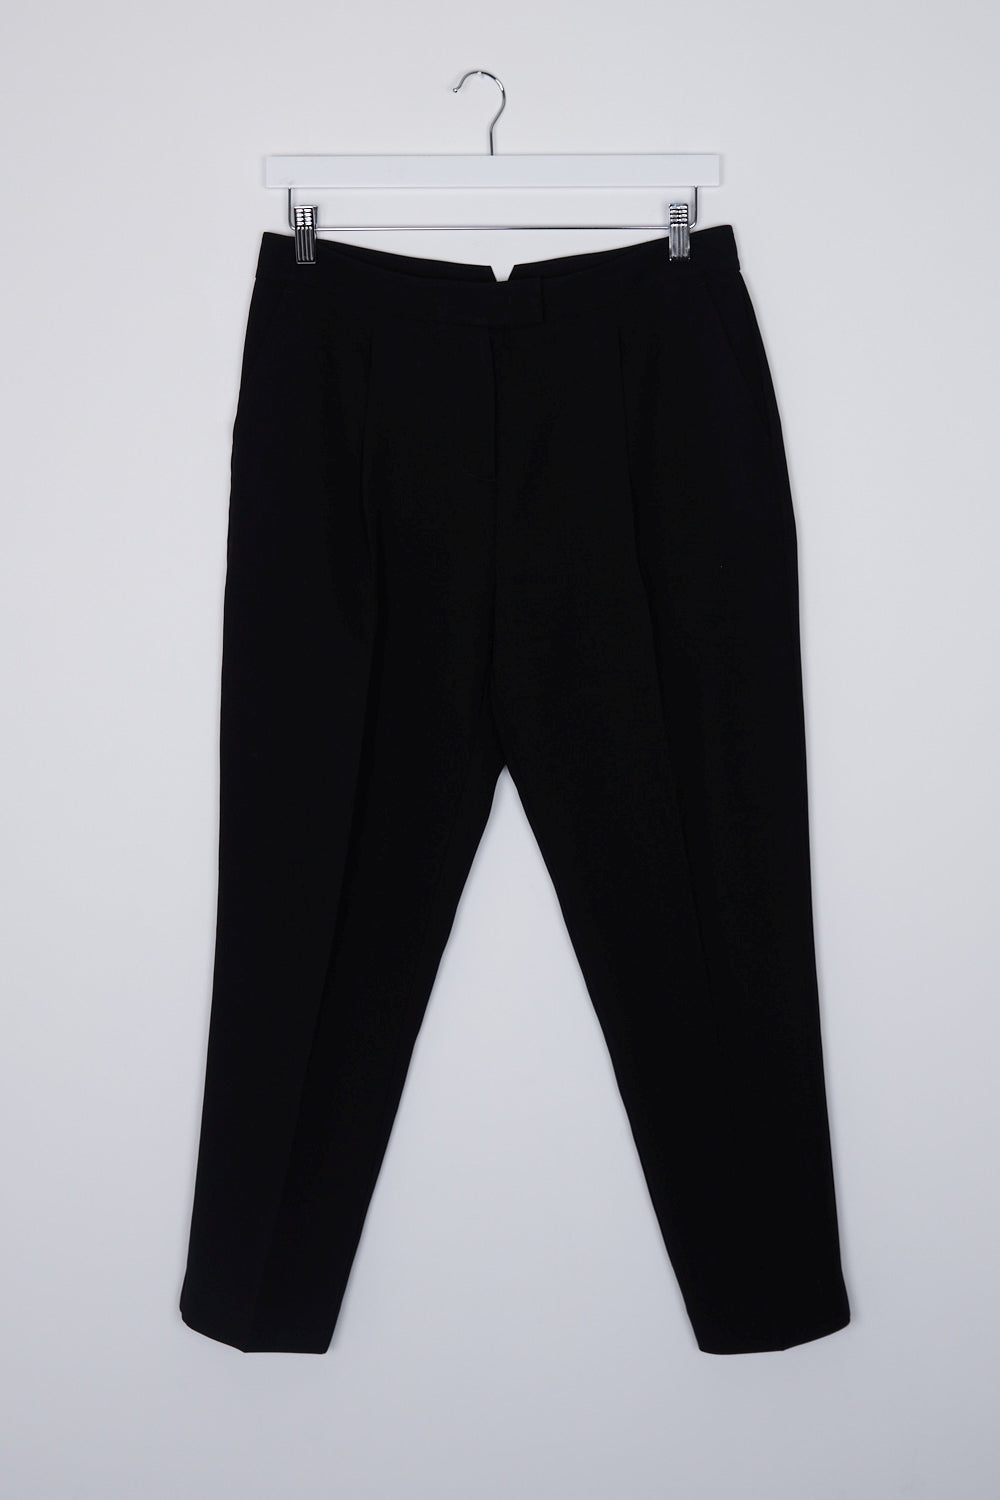 Trenery Black Pleated Front Pants 10